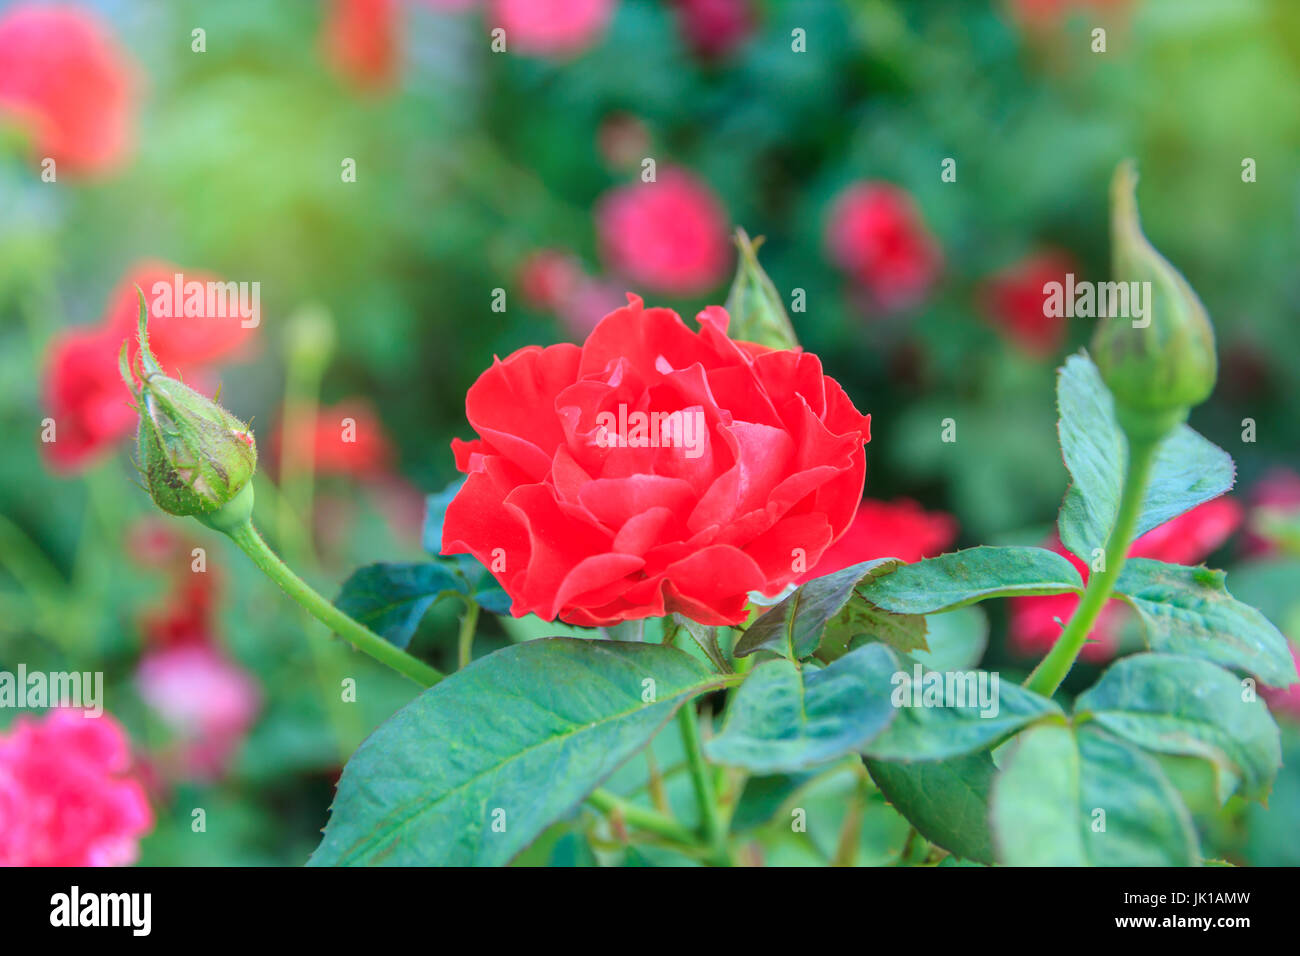 Red rose with stem in the garden Stock Photo